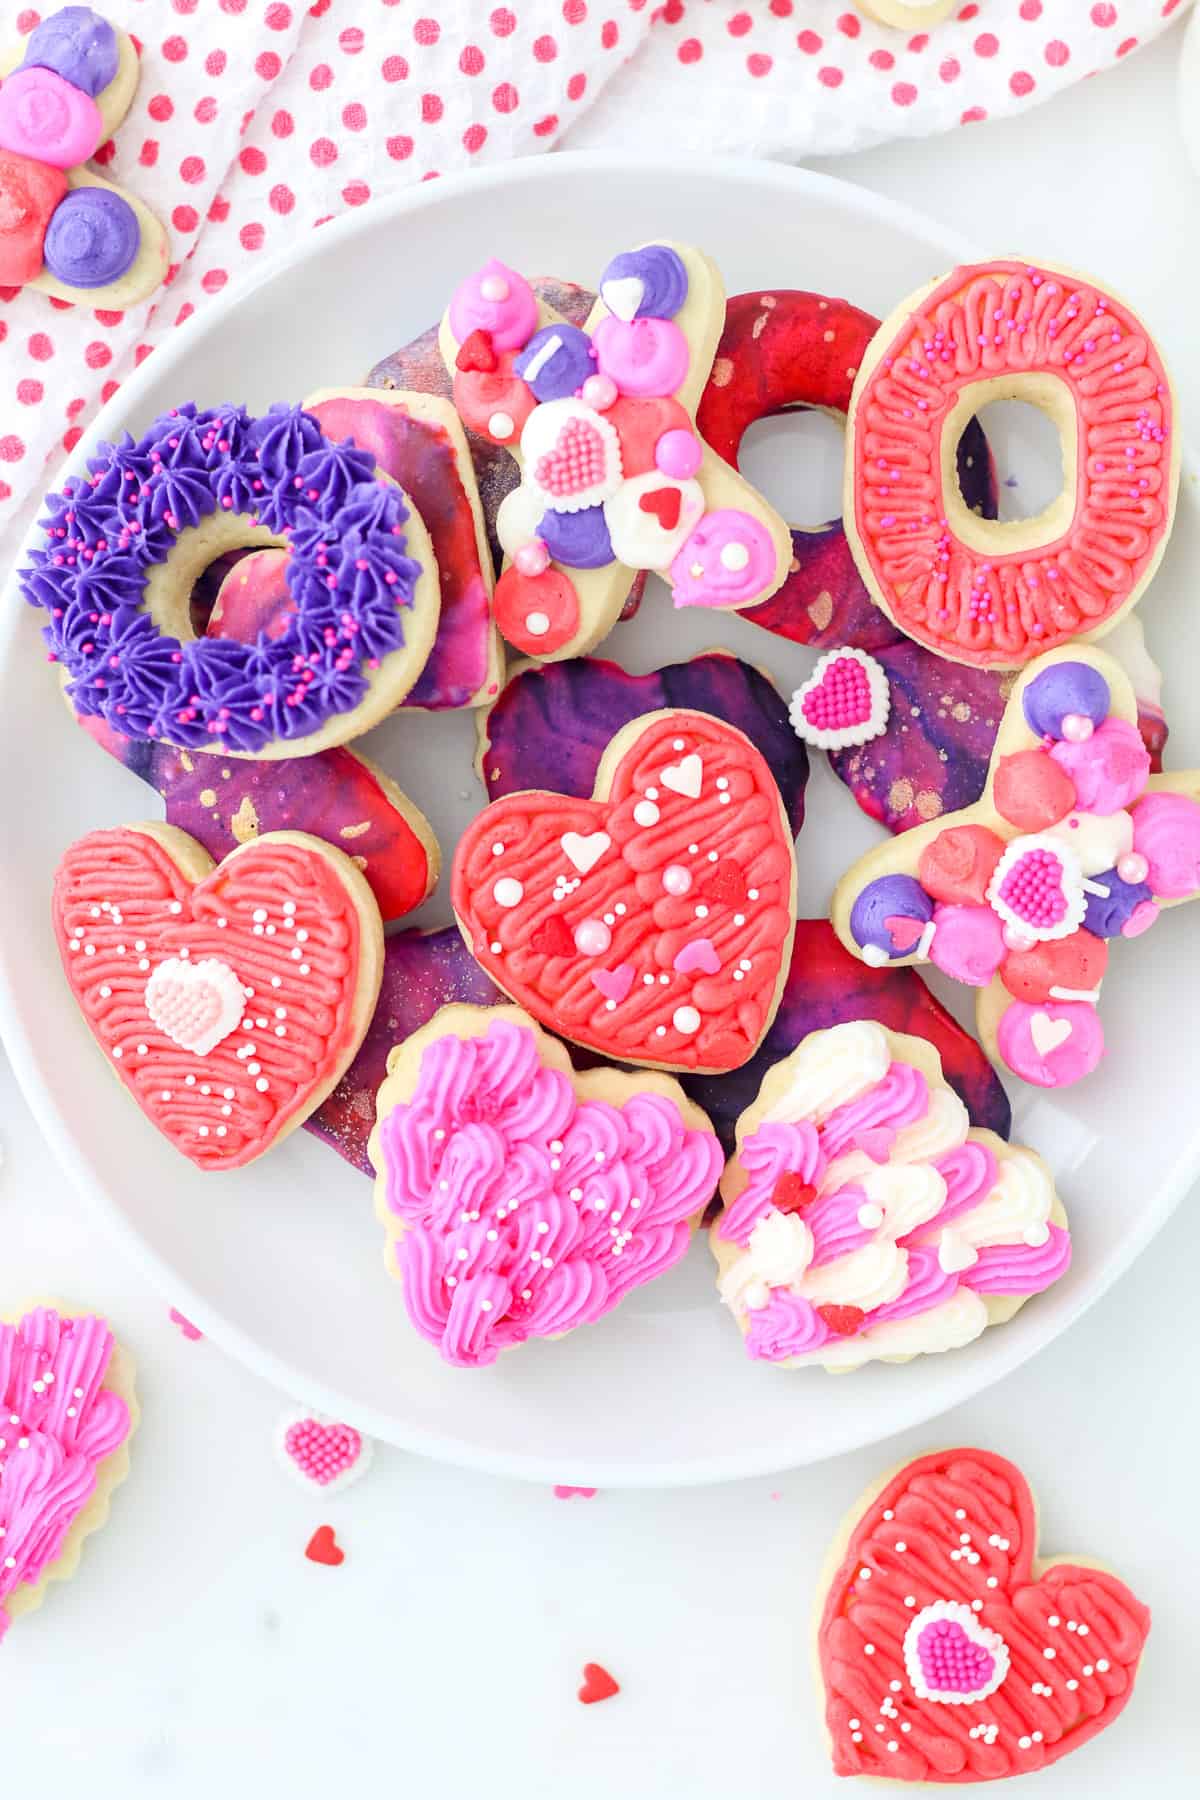 Overhead view of assorted Valentine's Day sugar cookies decorated with icing and frosting on a white plate.